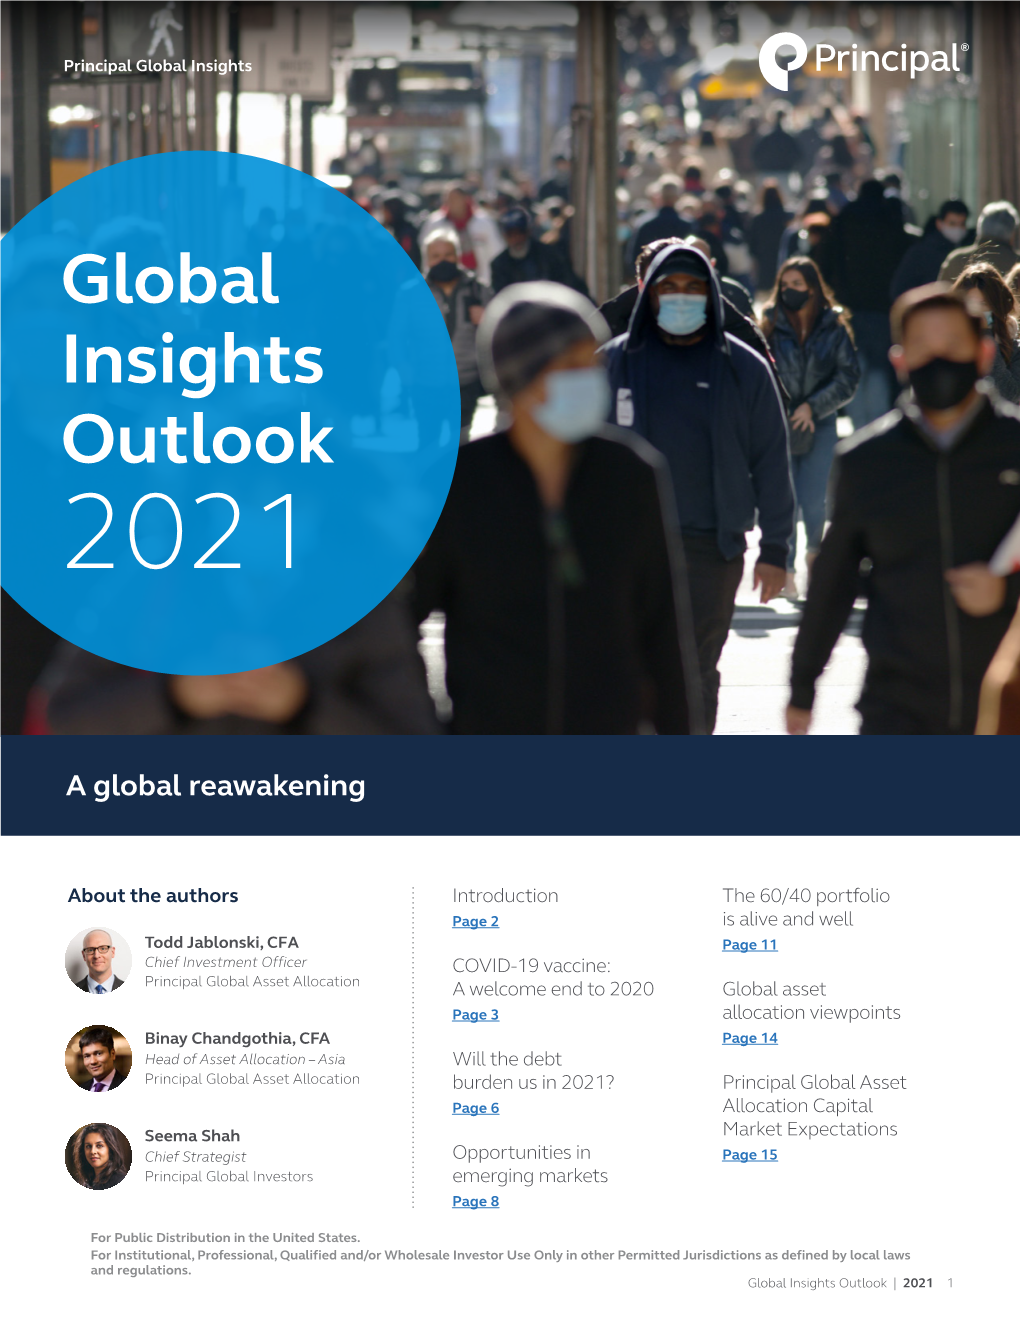 Global Insights Outlook 2021